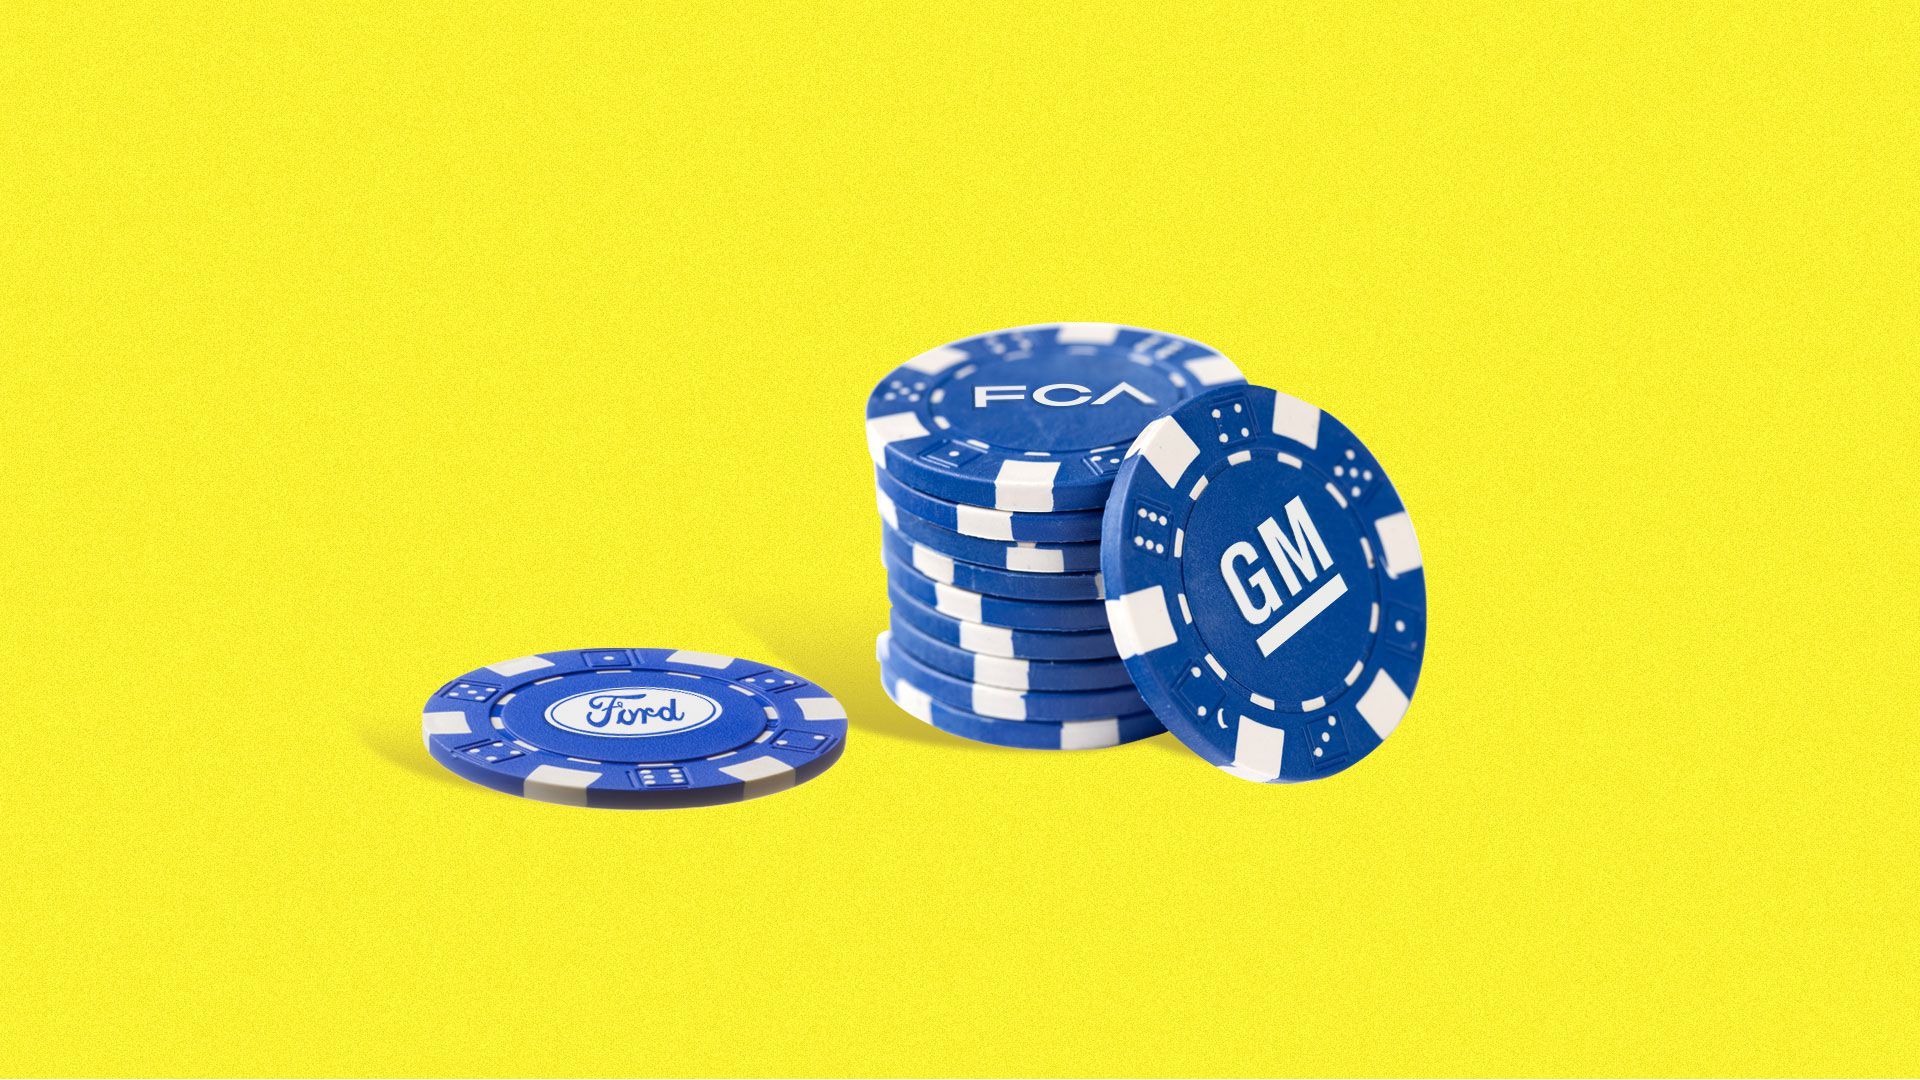 In this illustration, a pile of blue gambling chips have the GM logo on them.